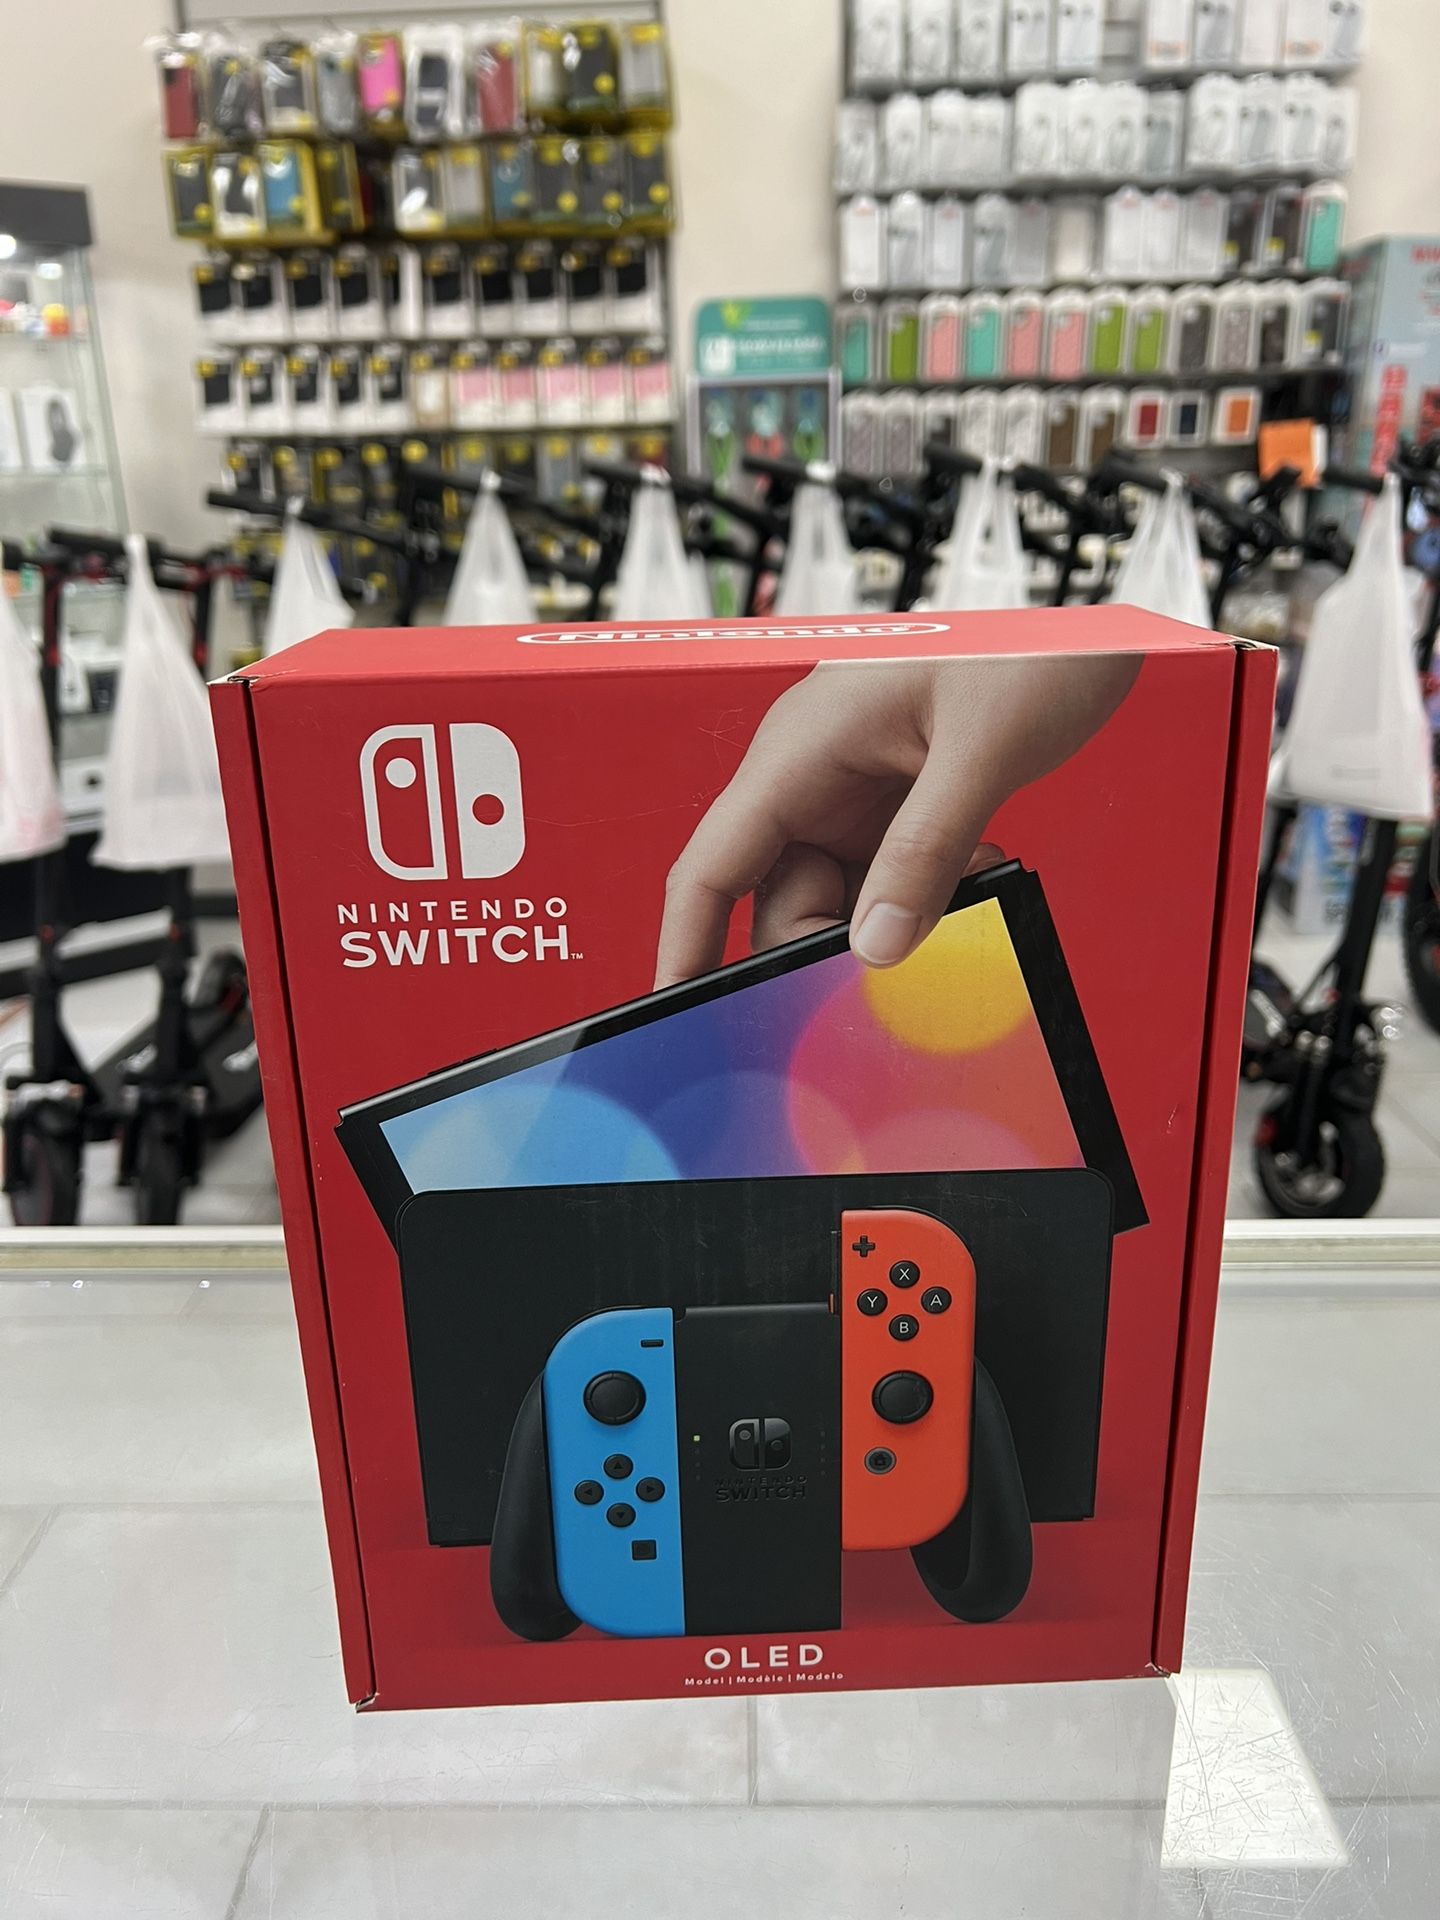 Nintendo Switch OLED New! Finance For $50 Down Payment!!